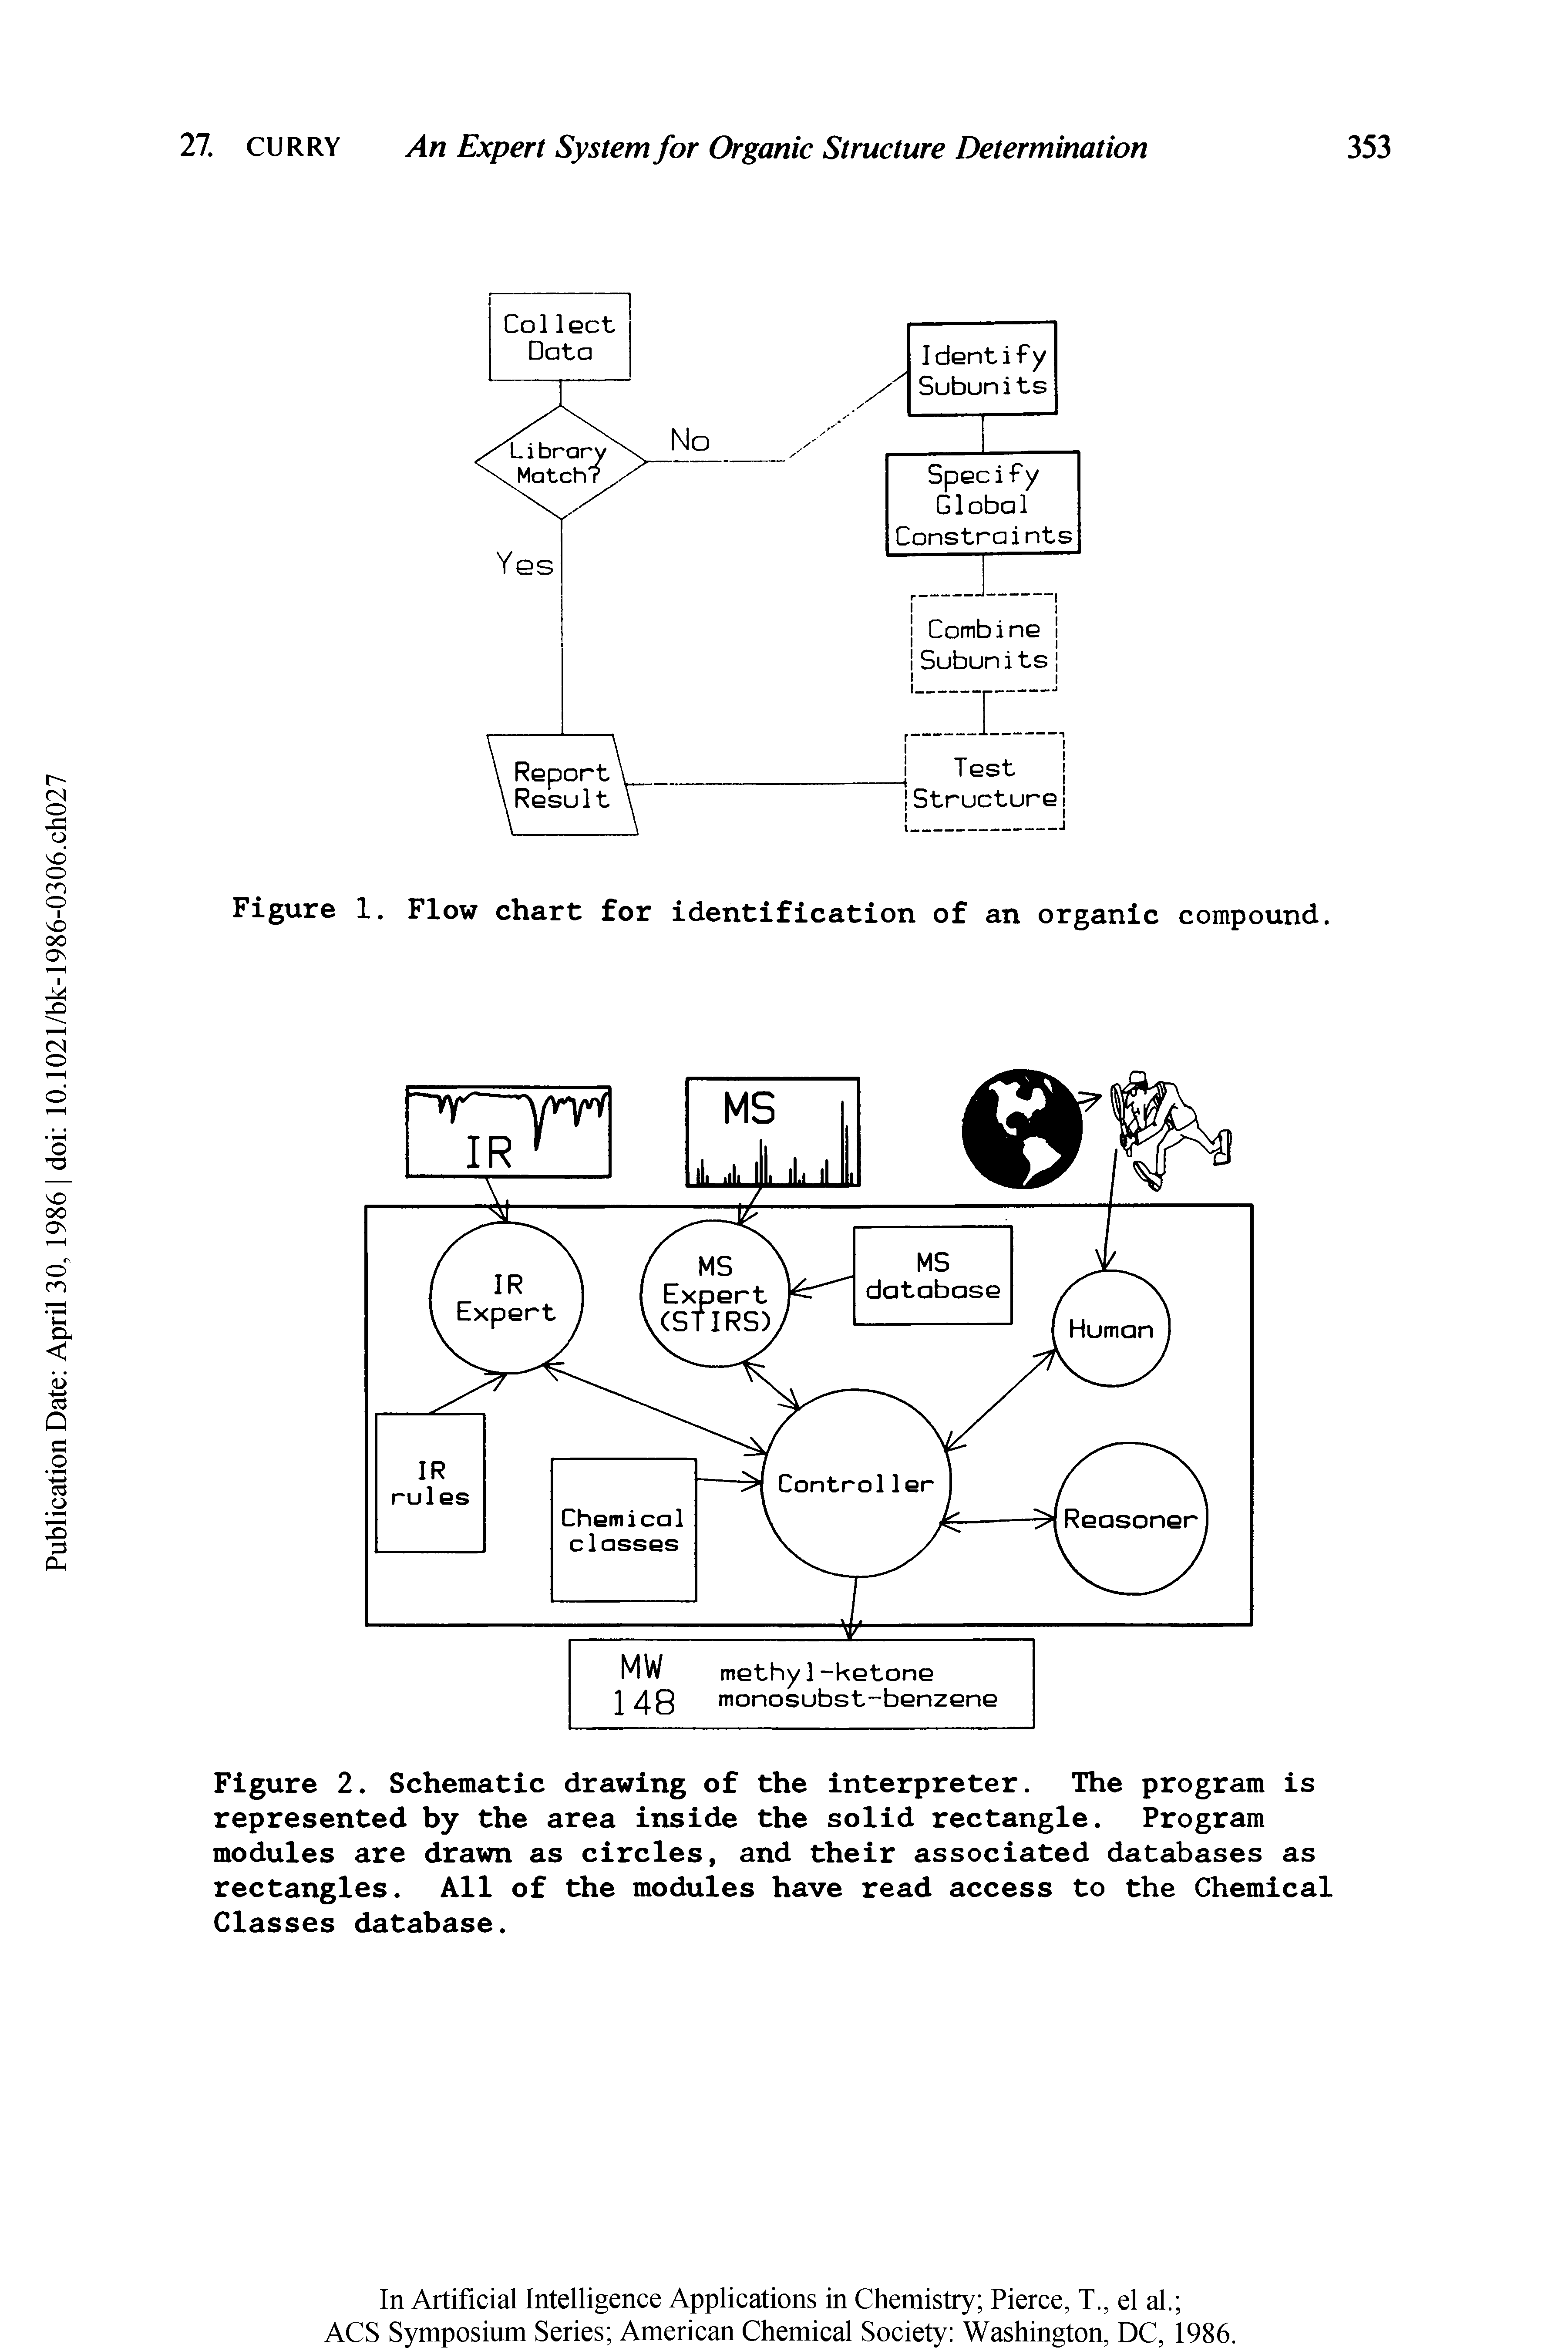 Figure 2. Schematic drawing of the interpreter. The program is represented by the area inside the solid rectangle. Program modules are drawn as circles, and their associated databases as rectangles. All of the modules have read access to the Chemical Classes database.